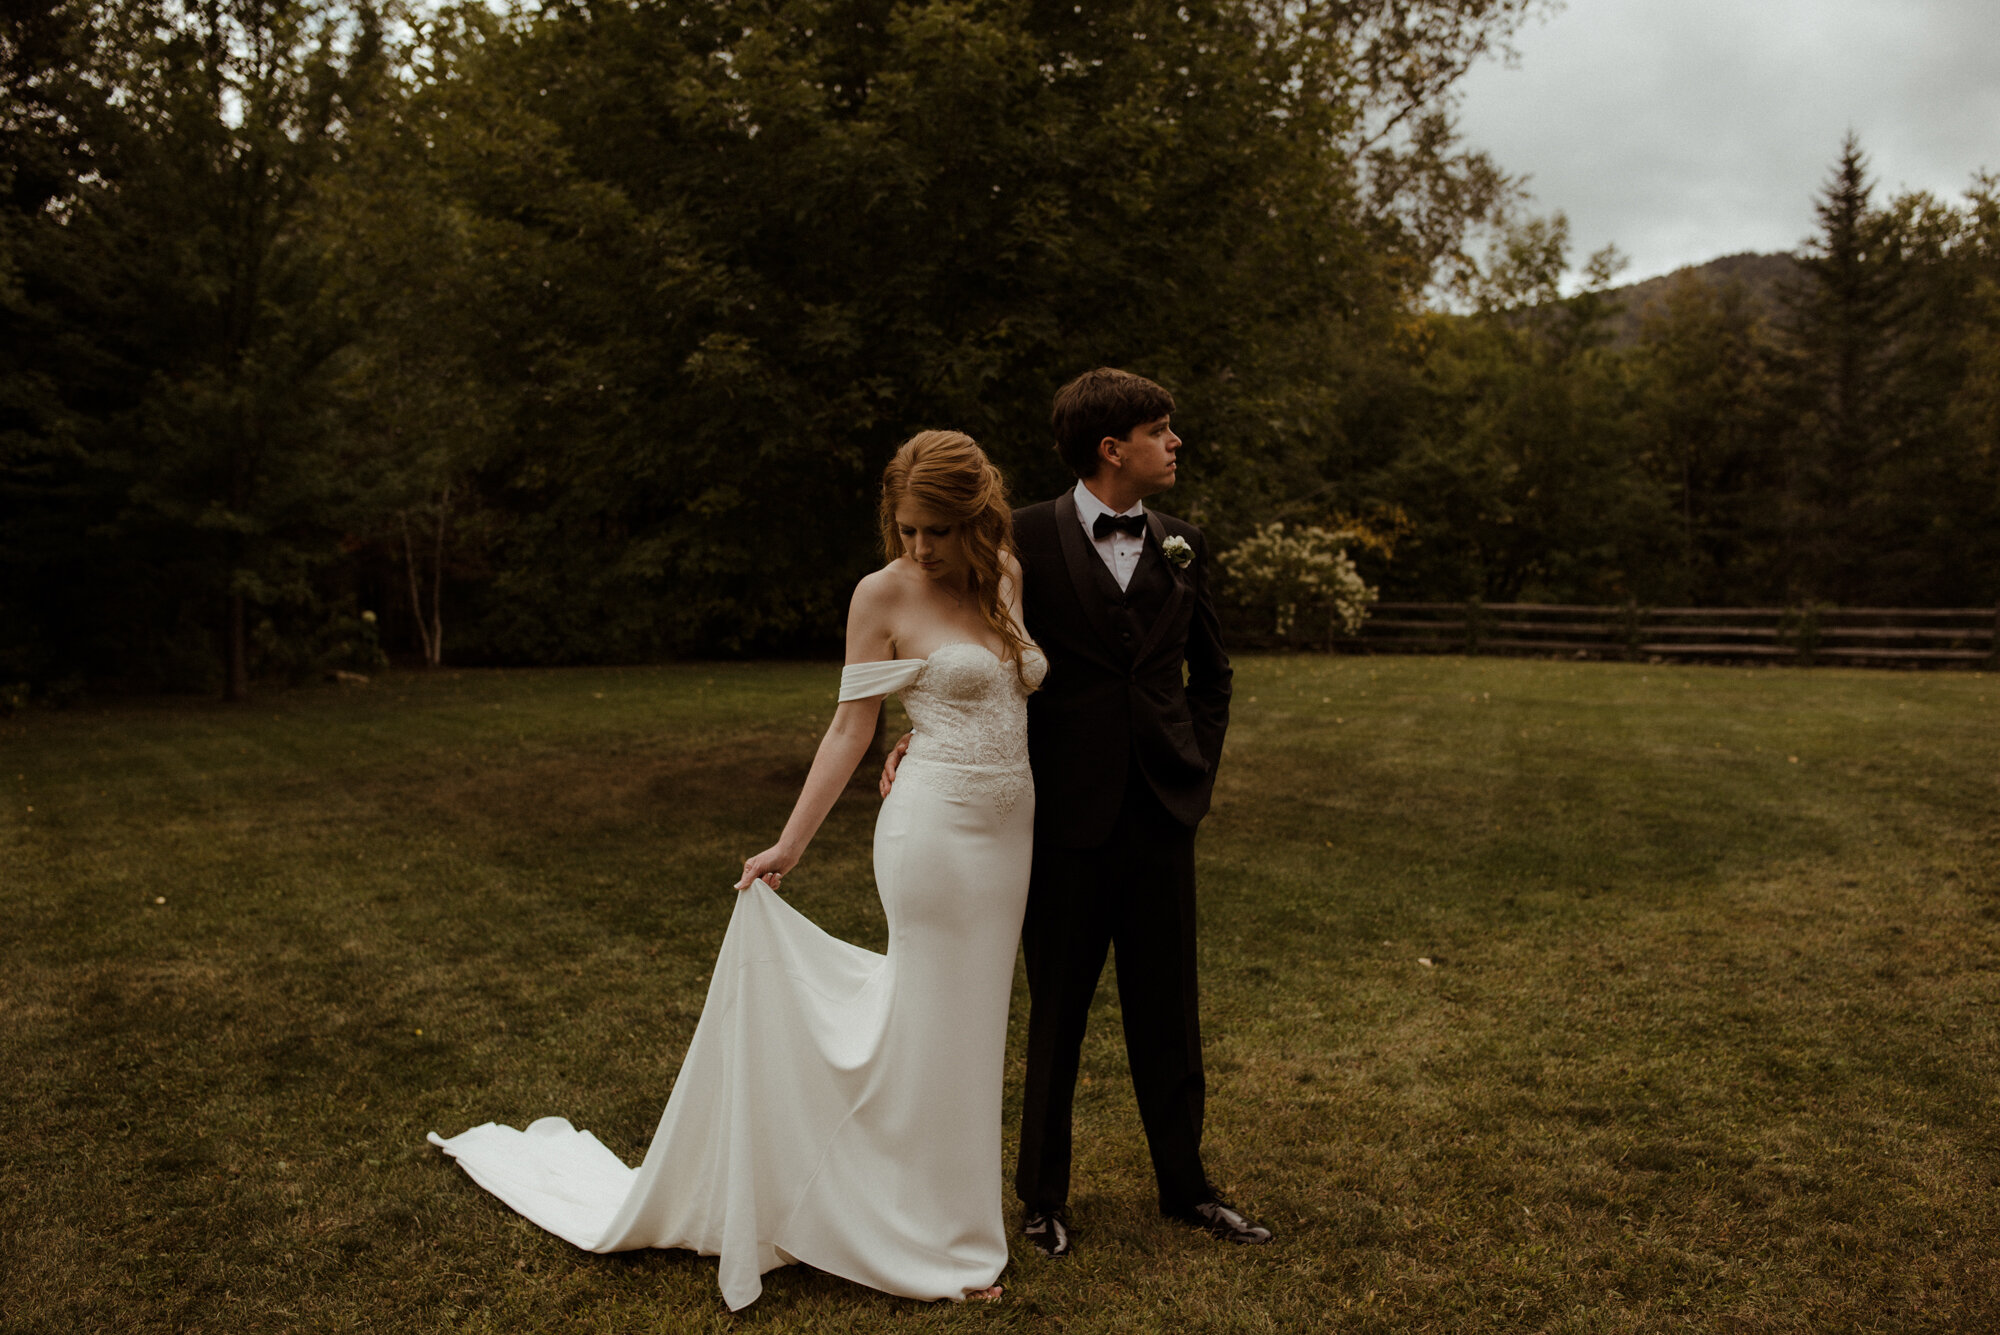 Autumn Elopement in New Hampshire - Backyard Wedding during COVID and Sunrise Hike in Wedding Dress - White Sails Creative_84.jpg